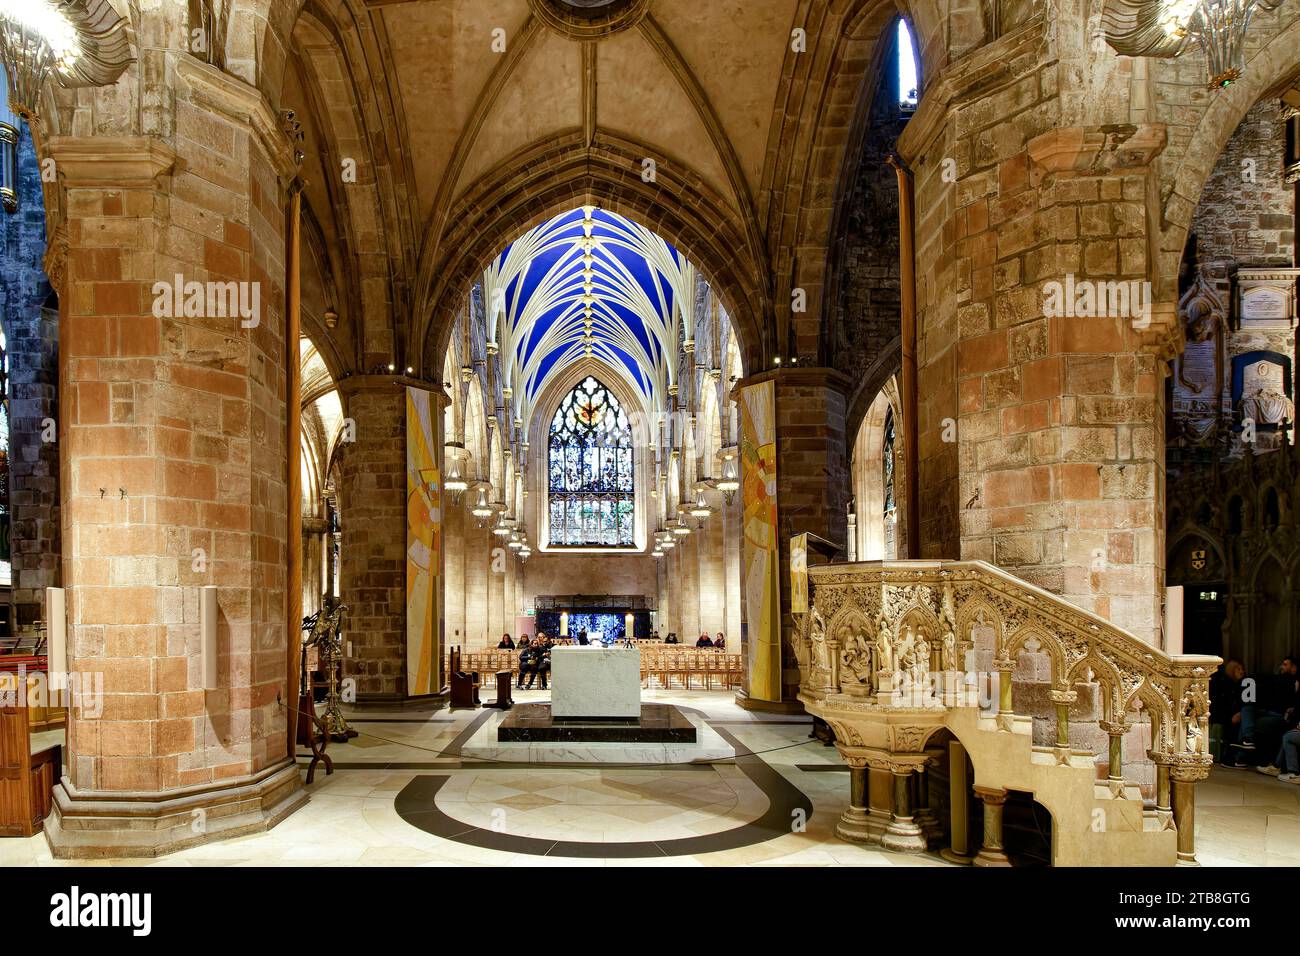 St Giles' Cathedral Old Town Edinburgh interior looking towards the pulpit and white marble communion table Stock Photo